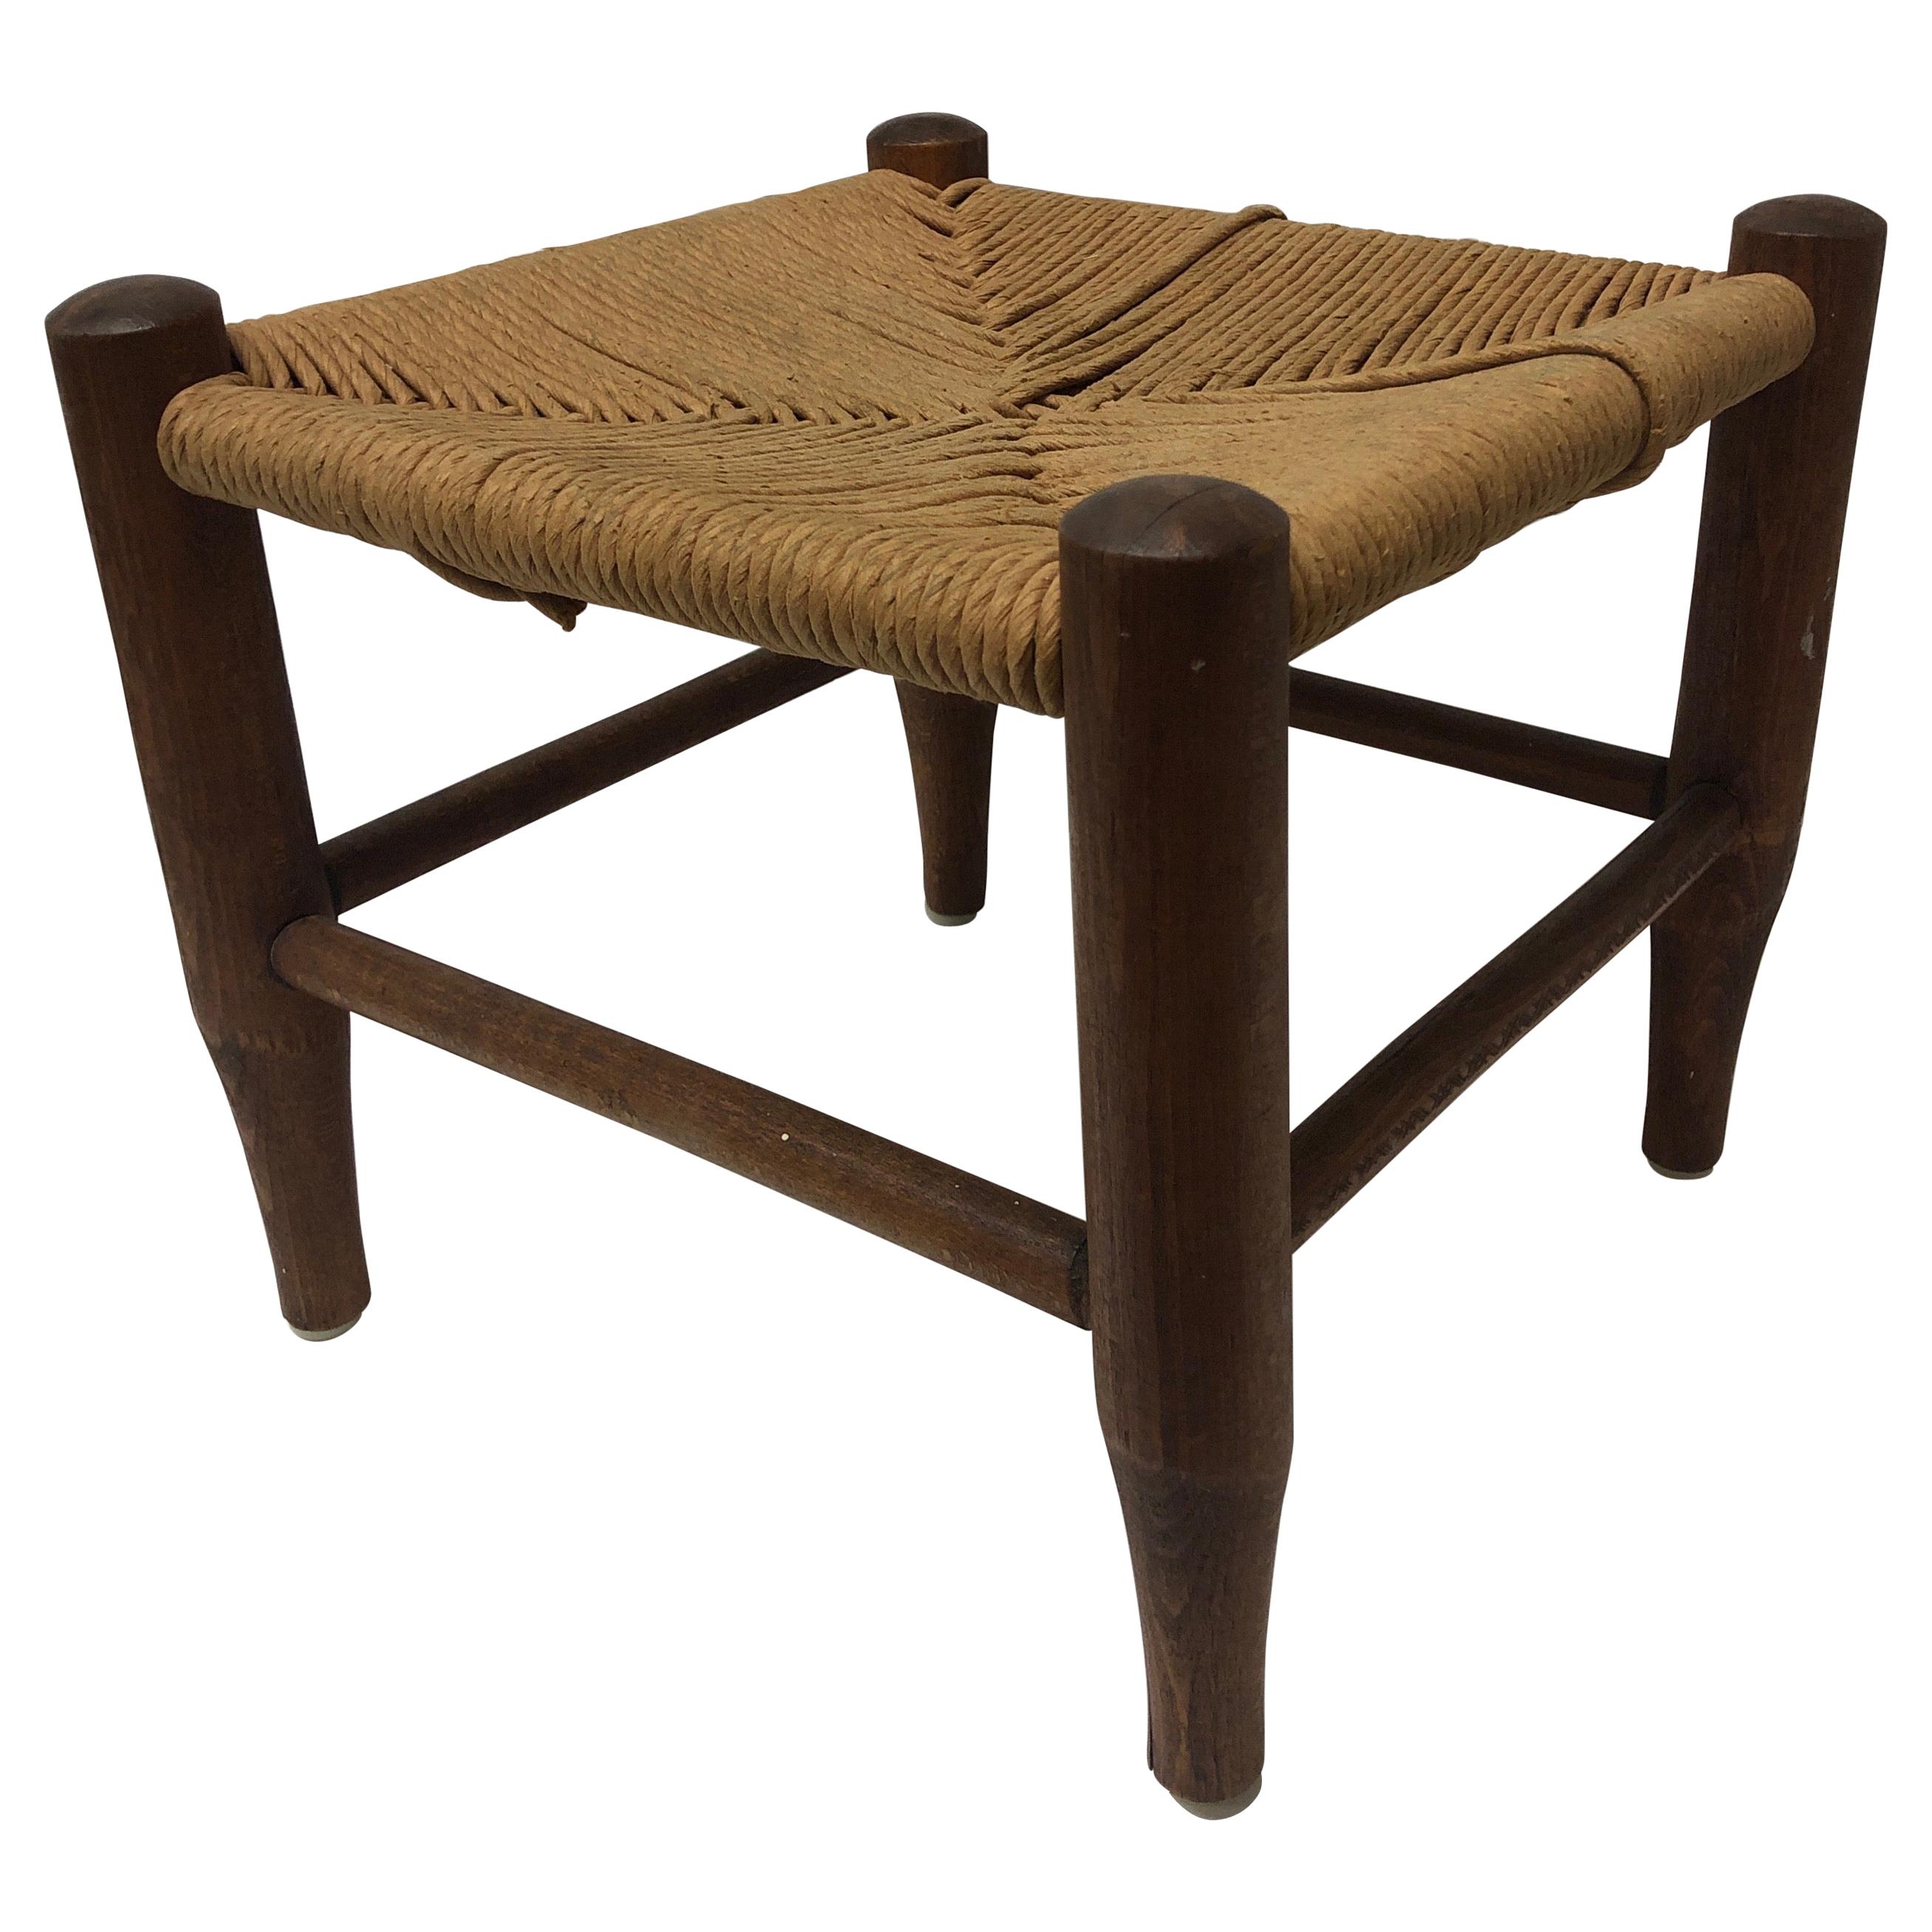 Vintage Woven Seat with Four Legs Adirondack Style Footstool